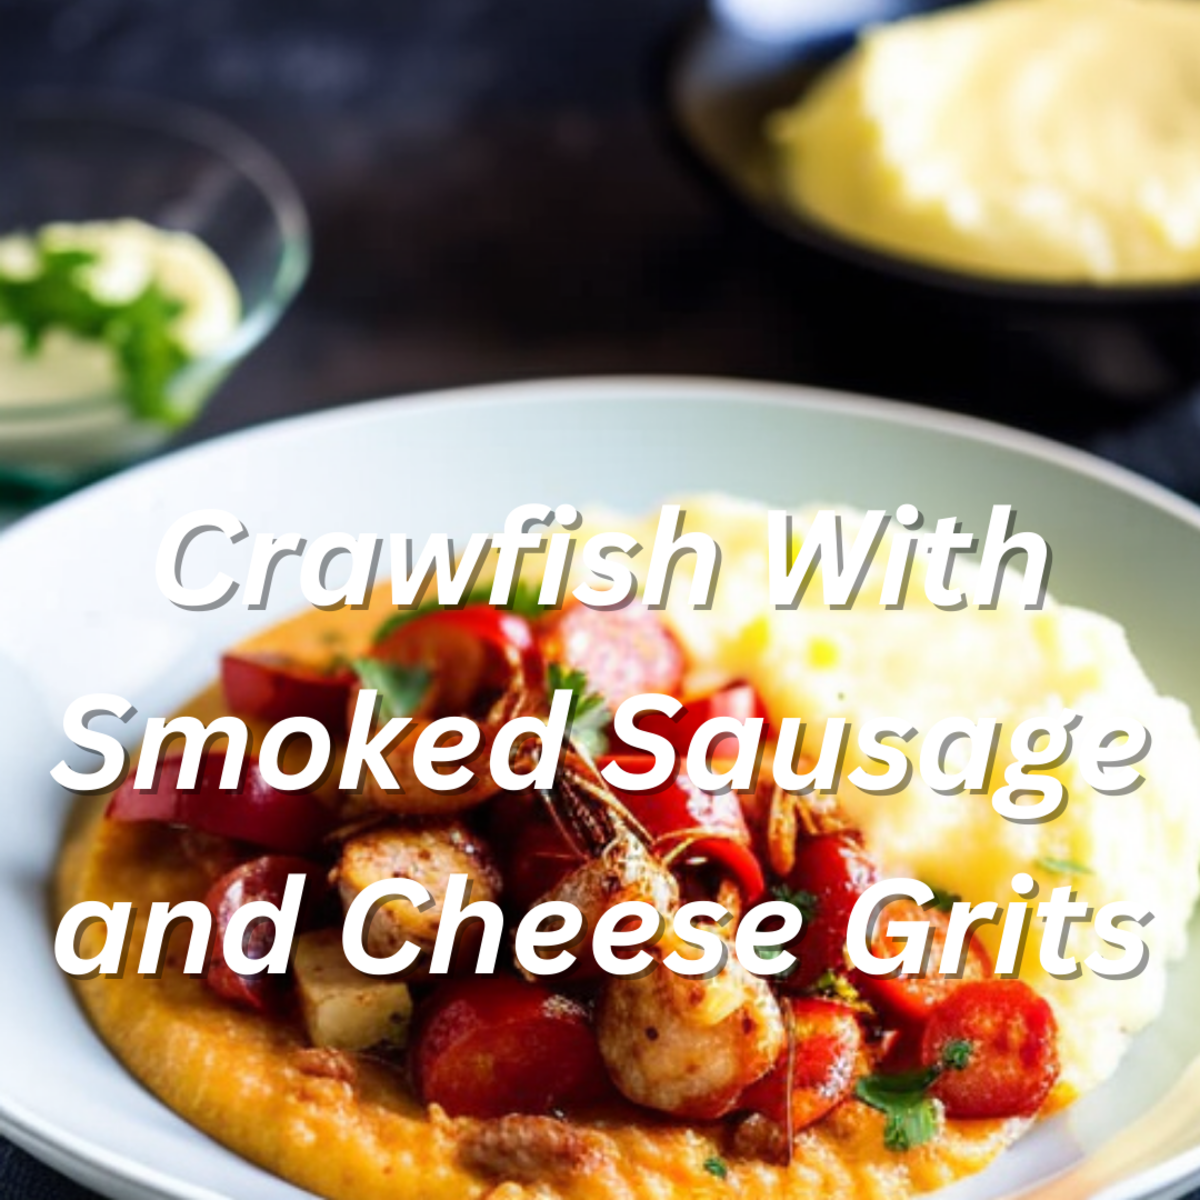 Crawfish With Smoked Sausage and Cheese Grits